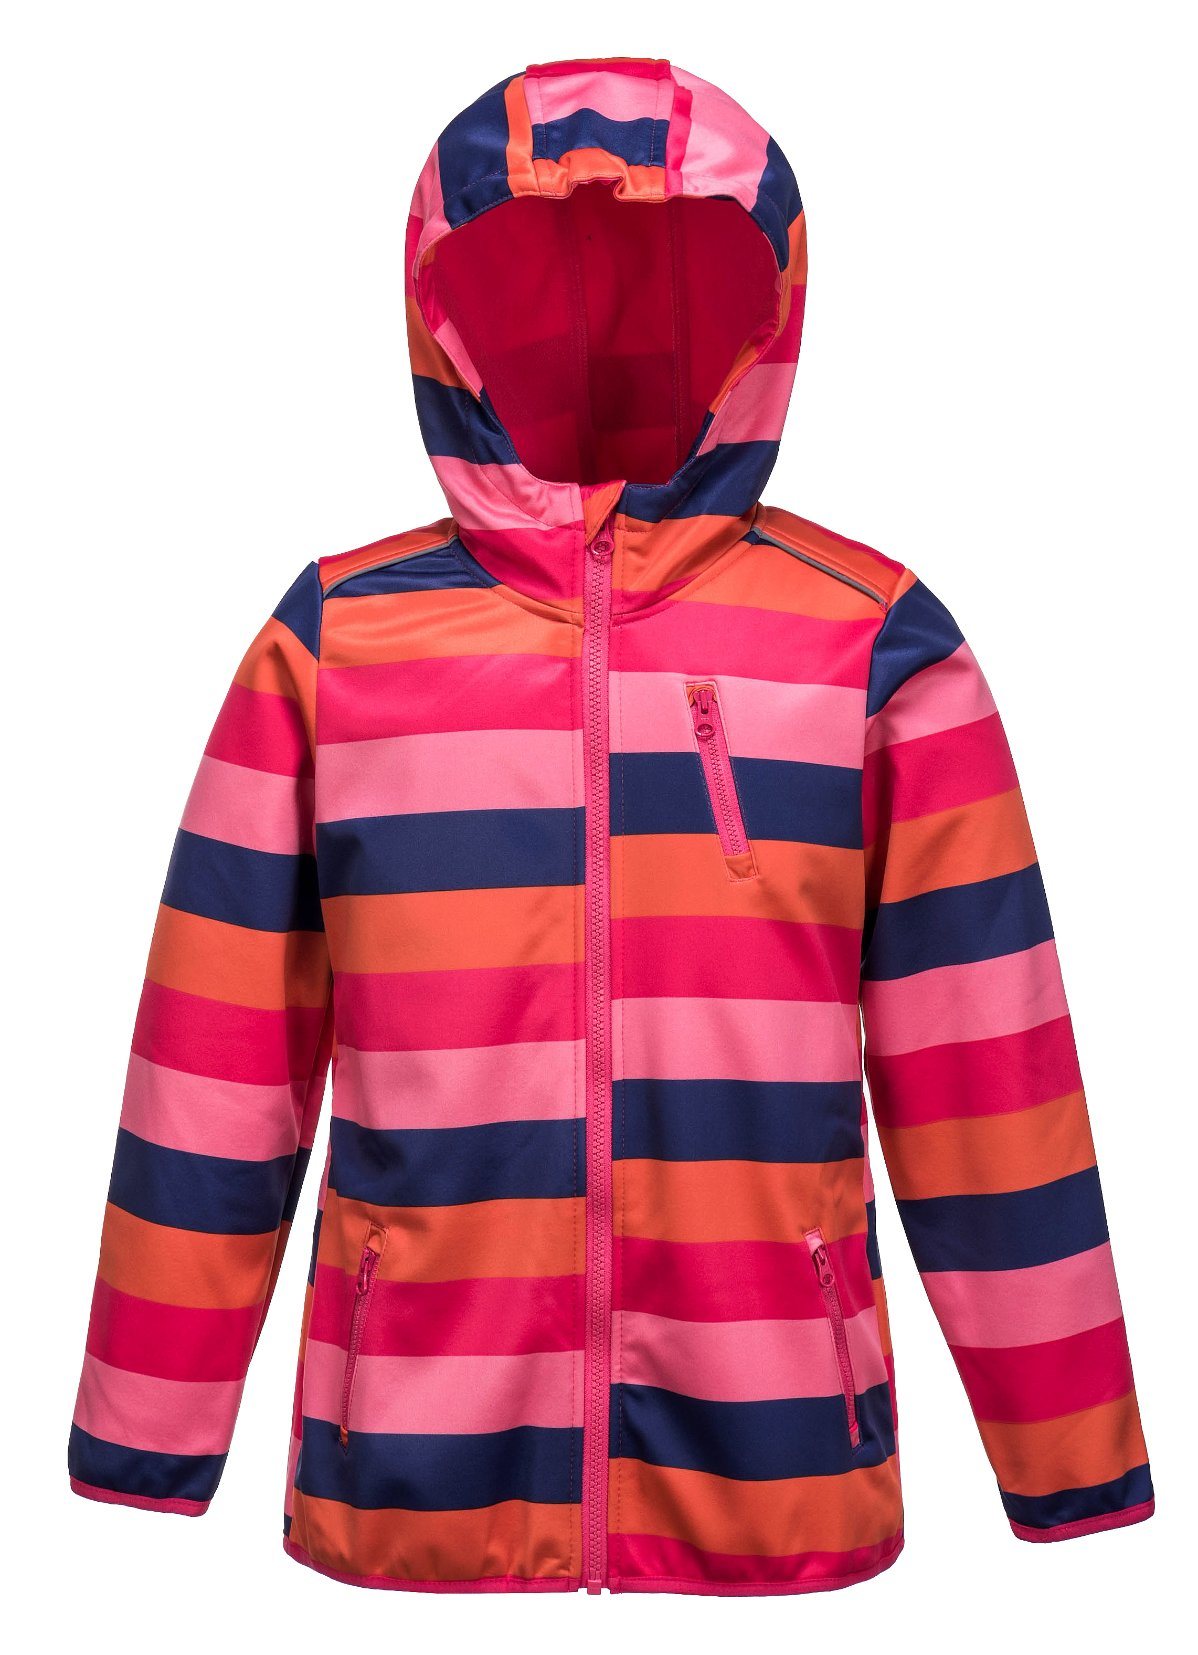 Mix Color PU Kids Outdoor Raincoat with Competitive Price